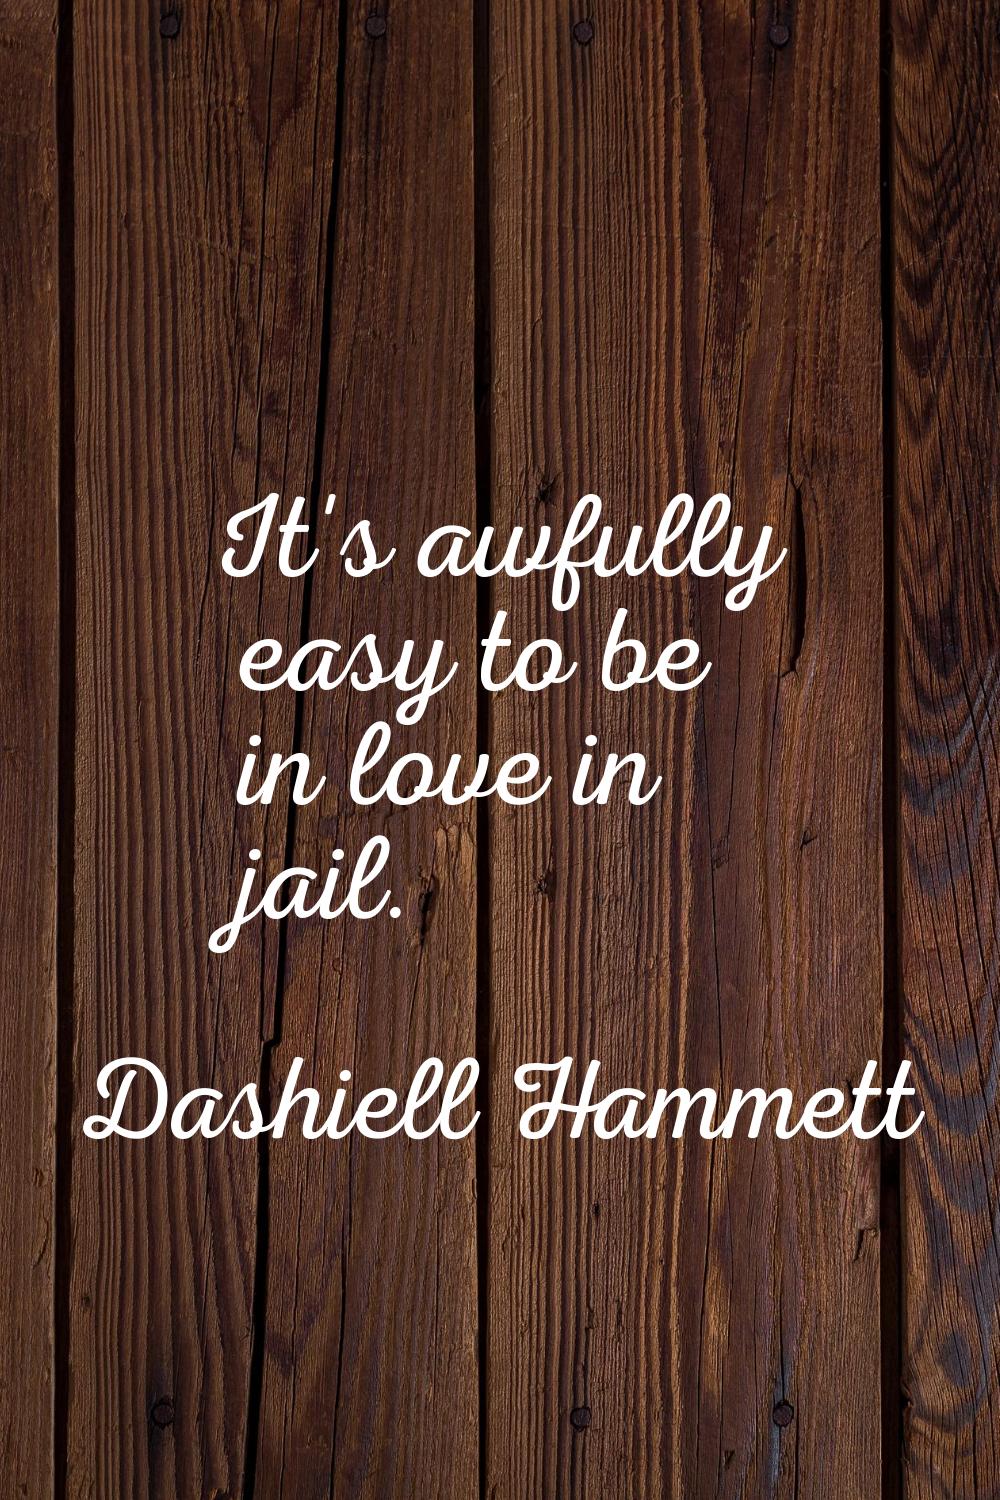 It's awfully easy to be in love in jail.